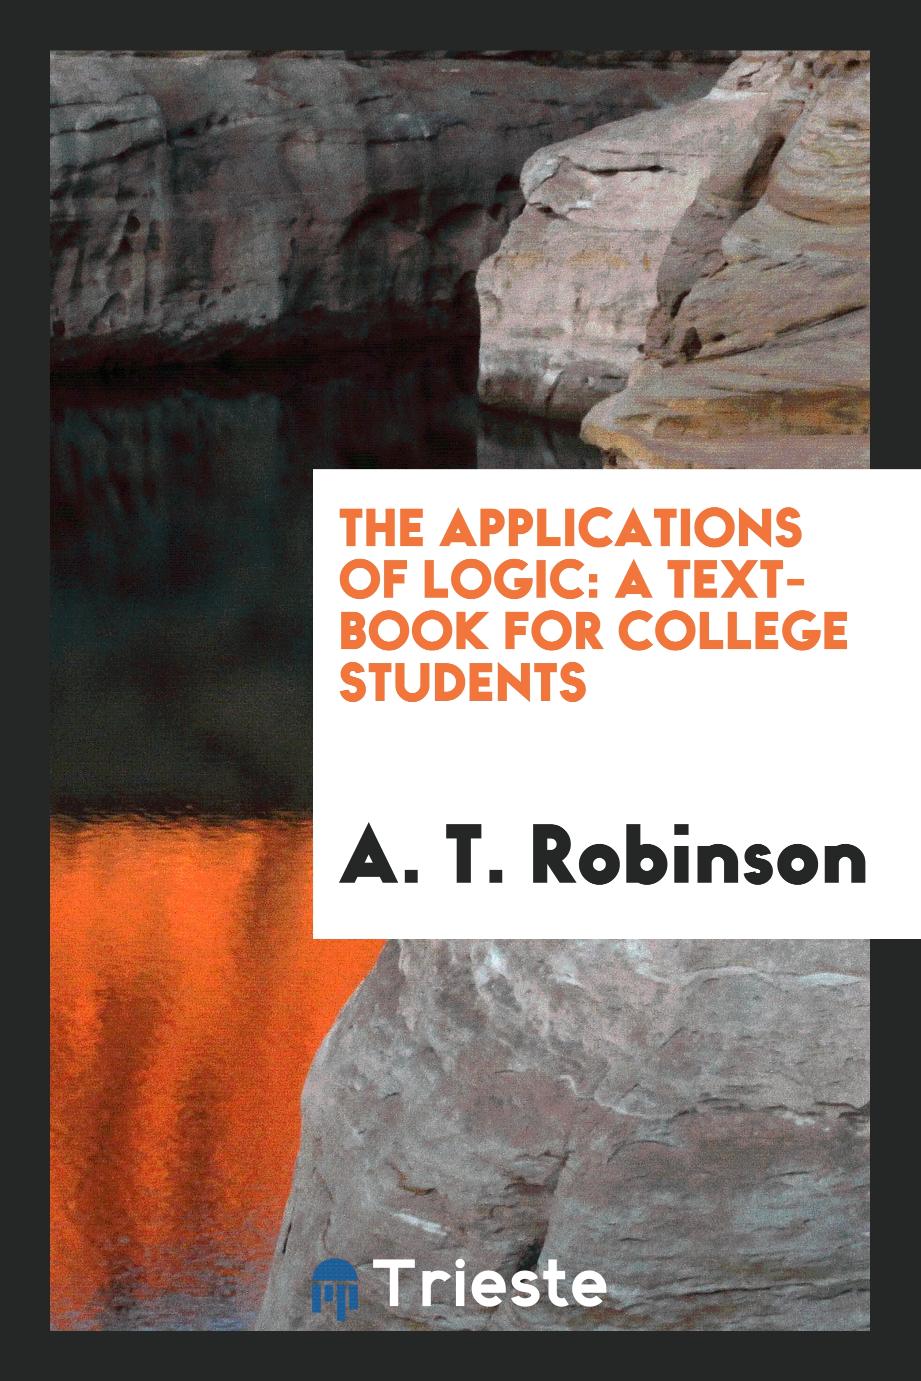 The Applications of Logic: A Text-Book for College Students